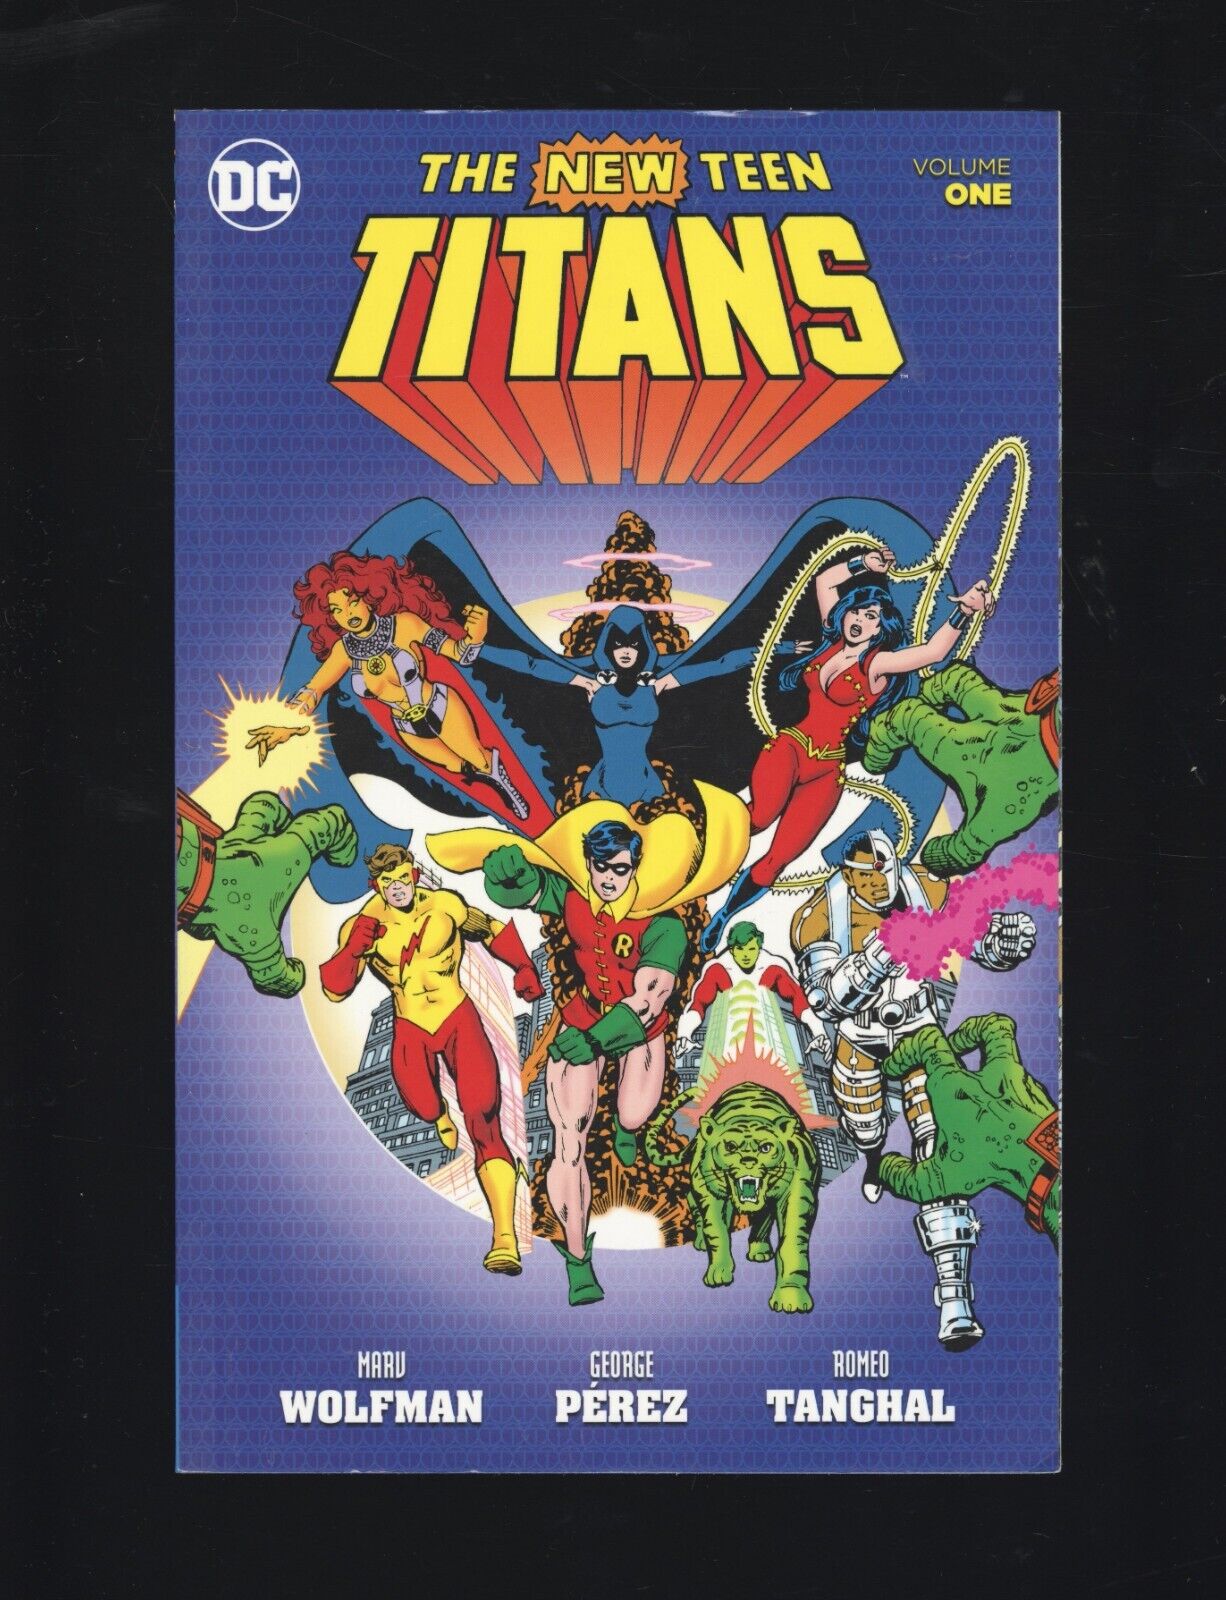 New Teen Titans Omnibus Vol. 1 (2022 Edition) Wolfman, Perez and Tanhal #143B